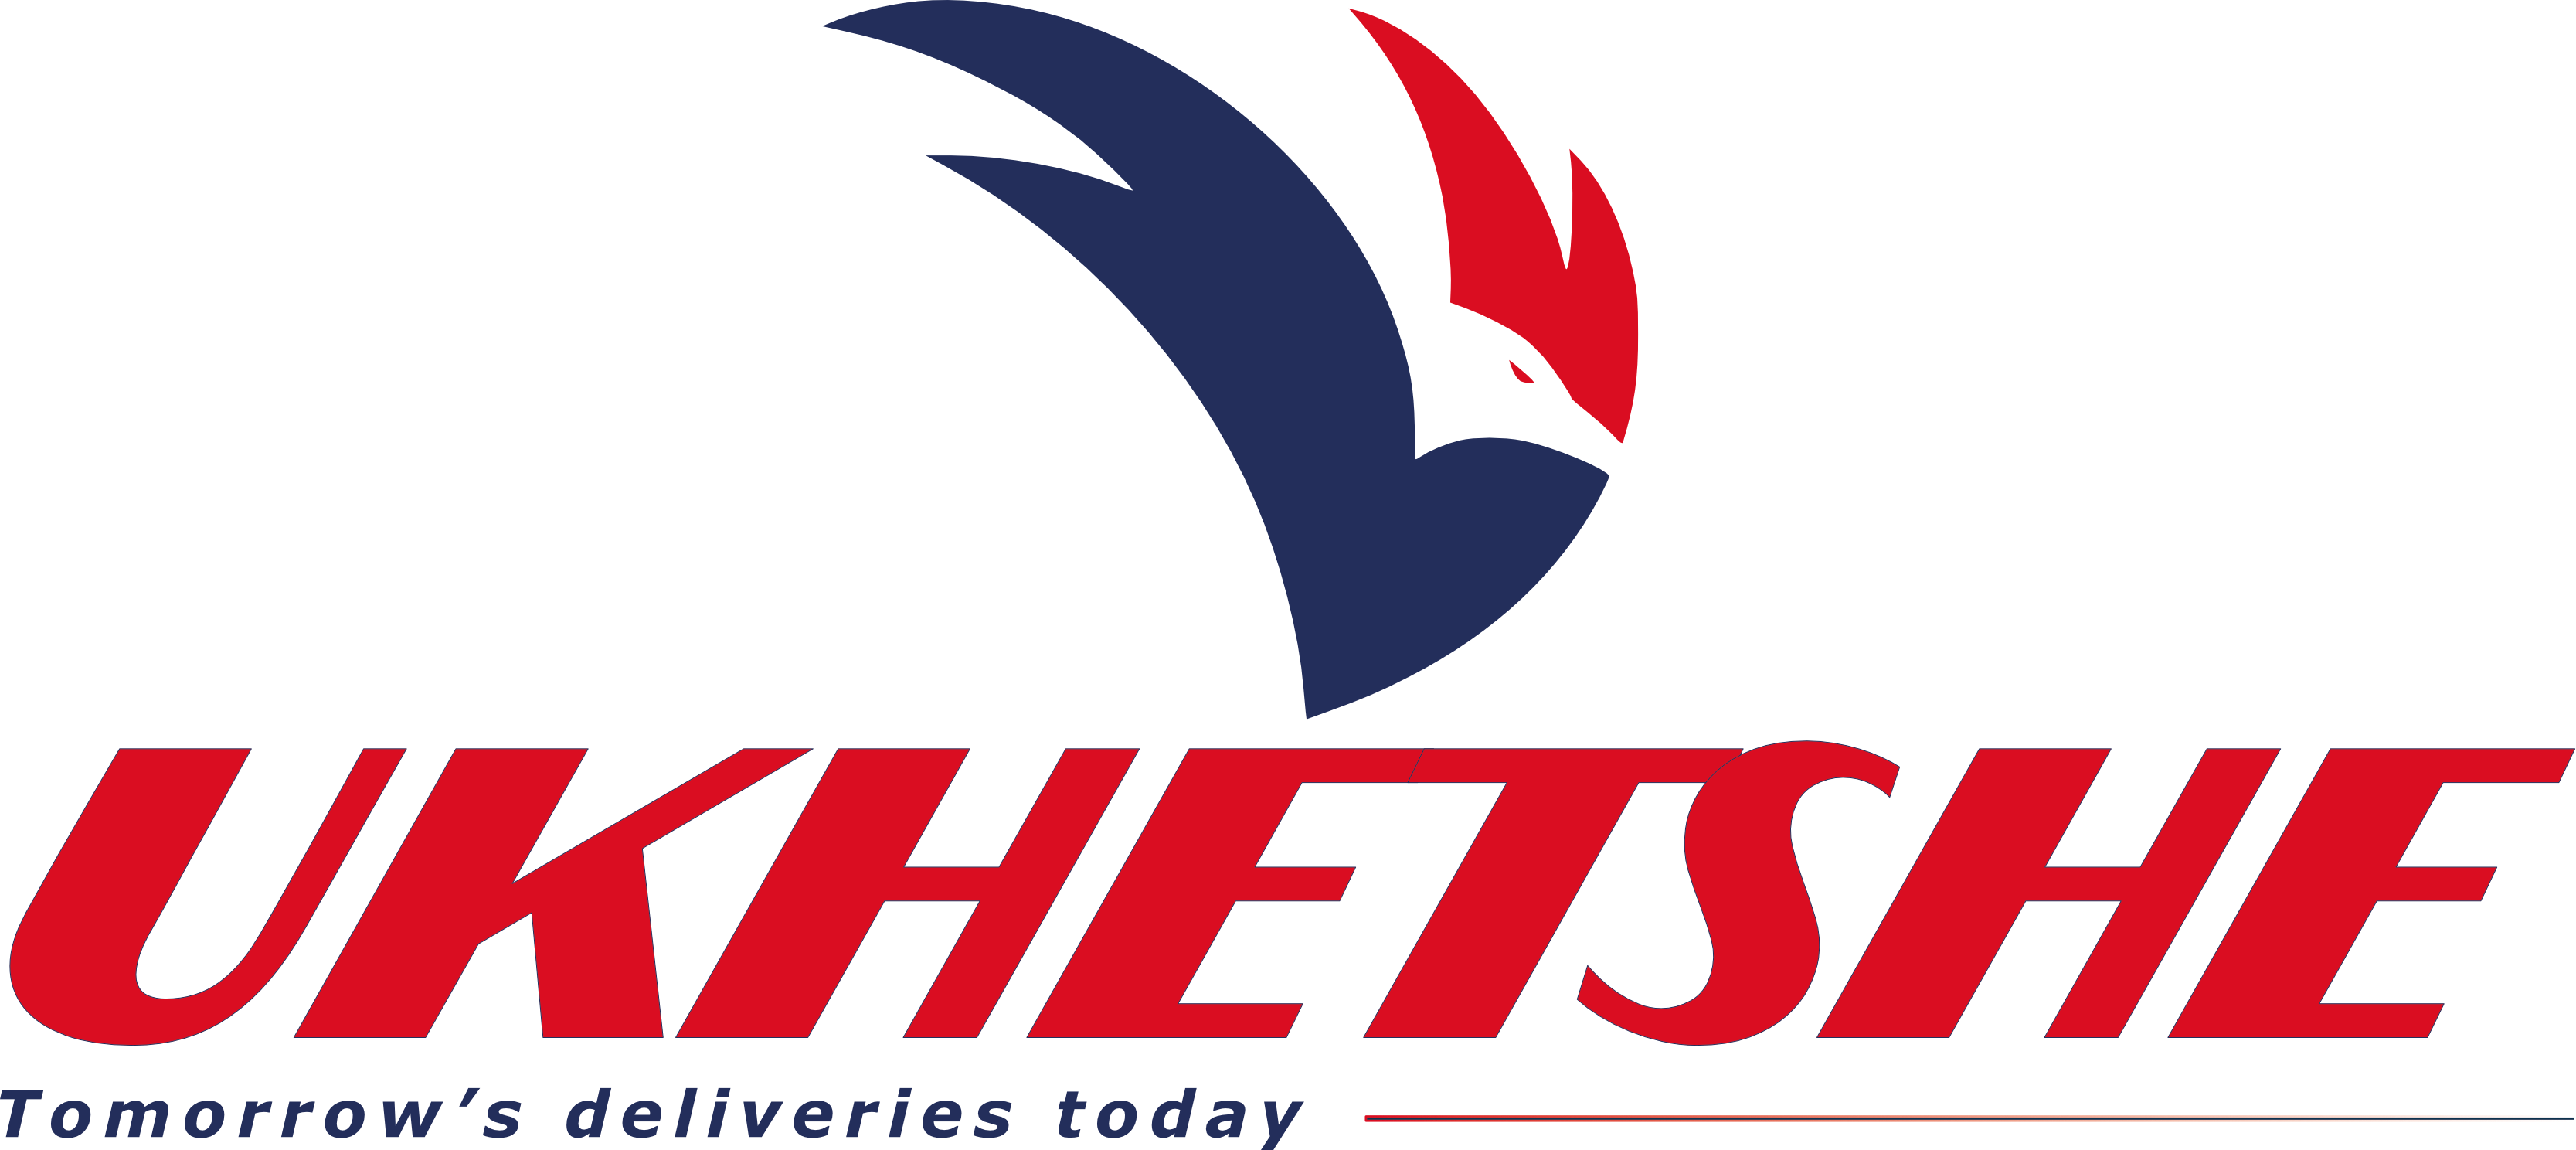 Ukhetshe Courier Services